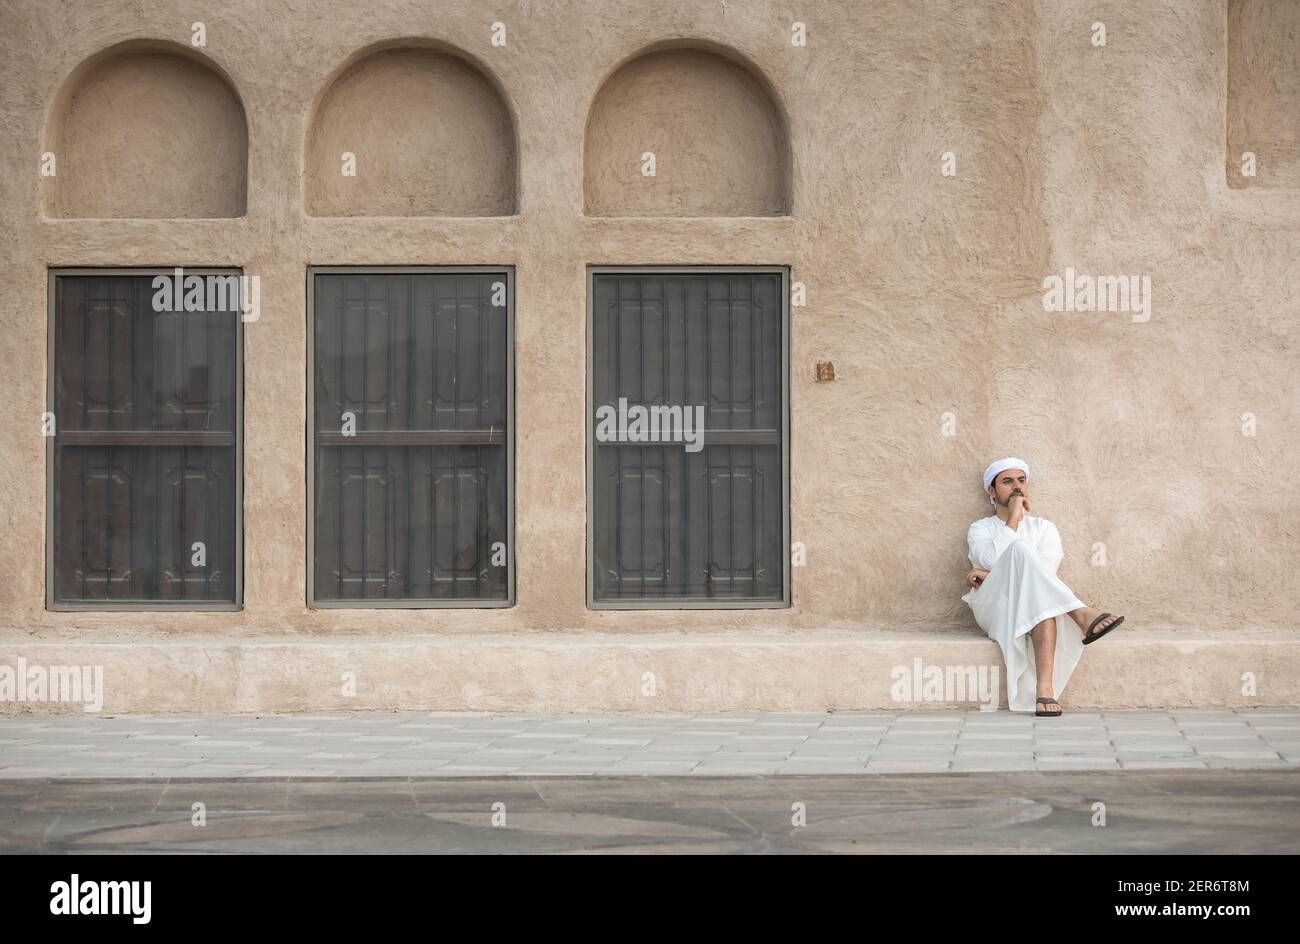 arab man in traditional clothing in historic Shindagha district of Dubai Stock Photo